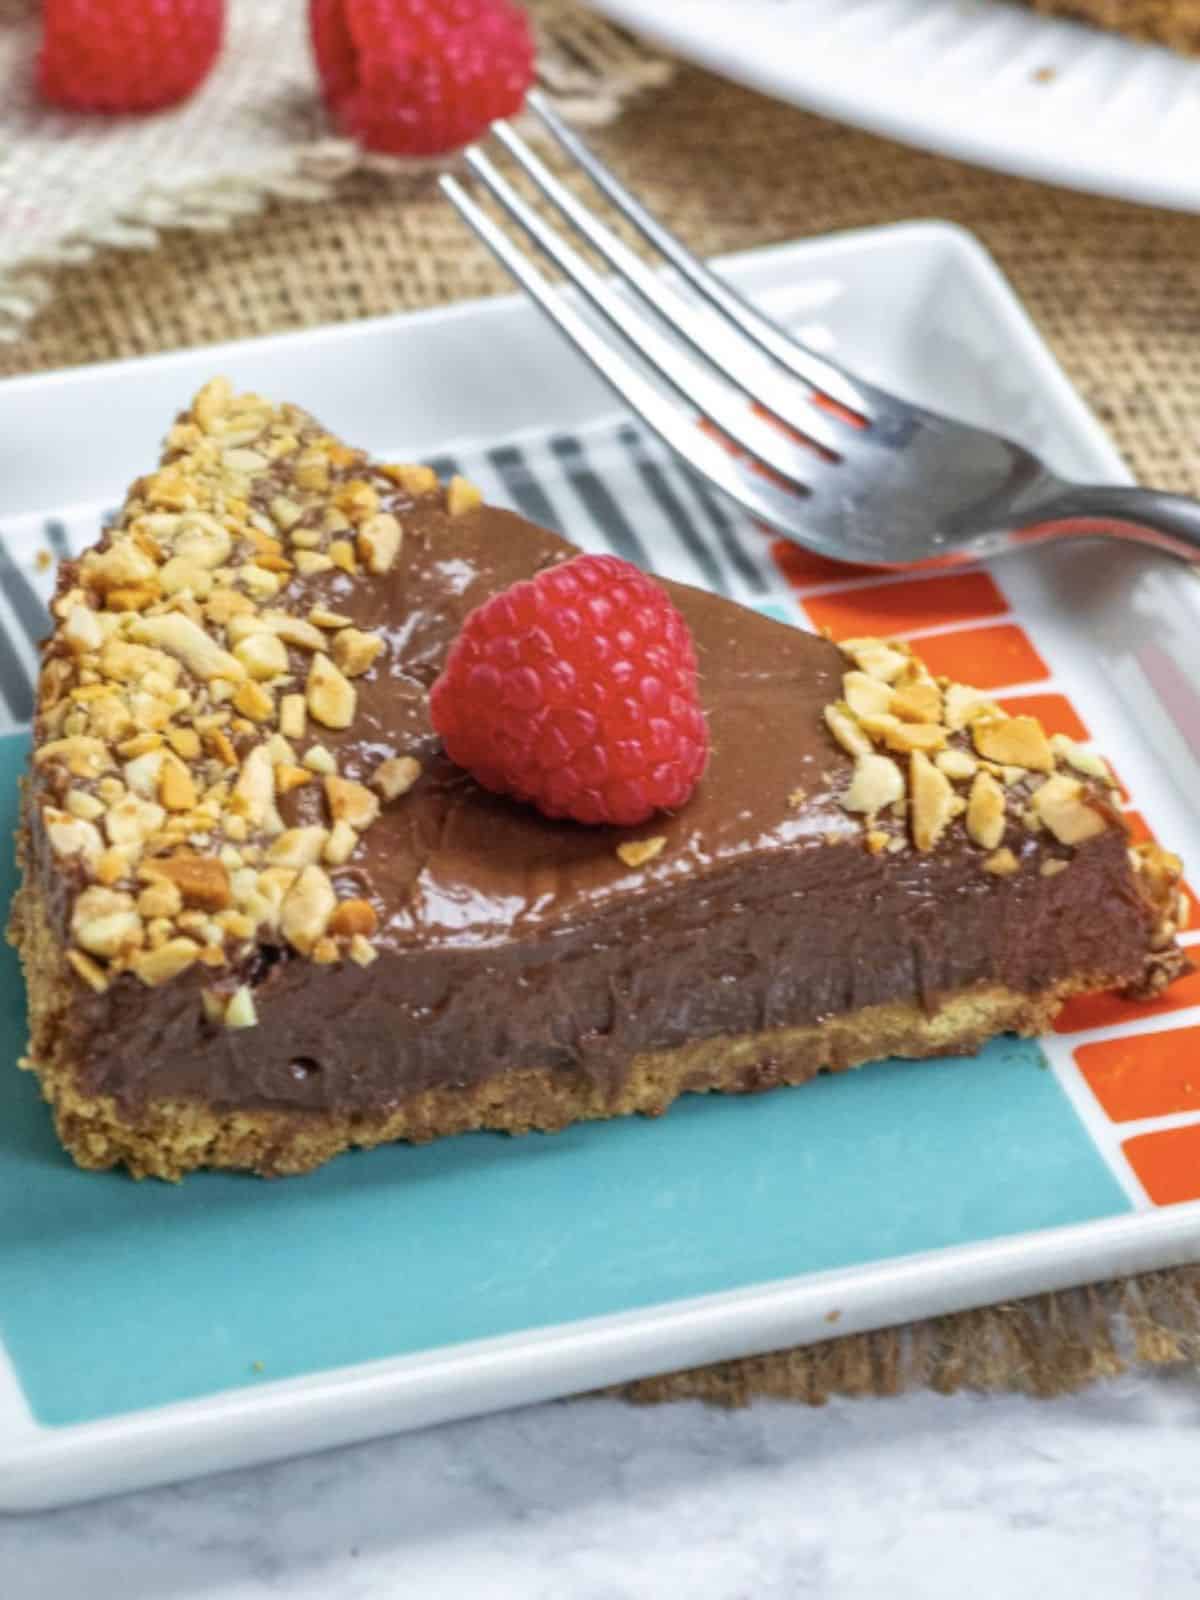 no-bake Ferrero Rocher cheesecake with a Nutella graham cracker bake and nuts on top.